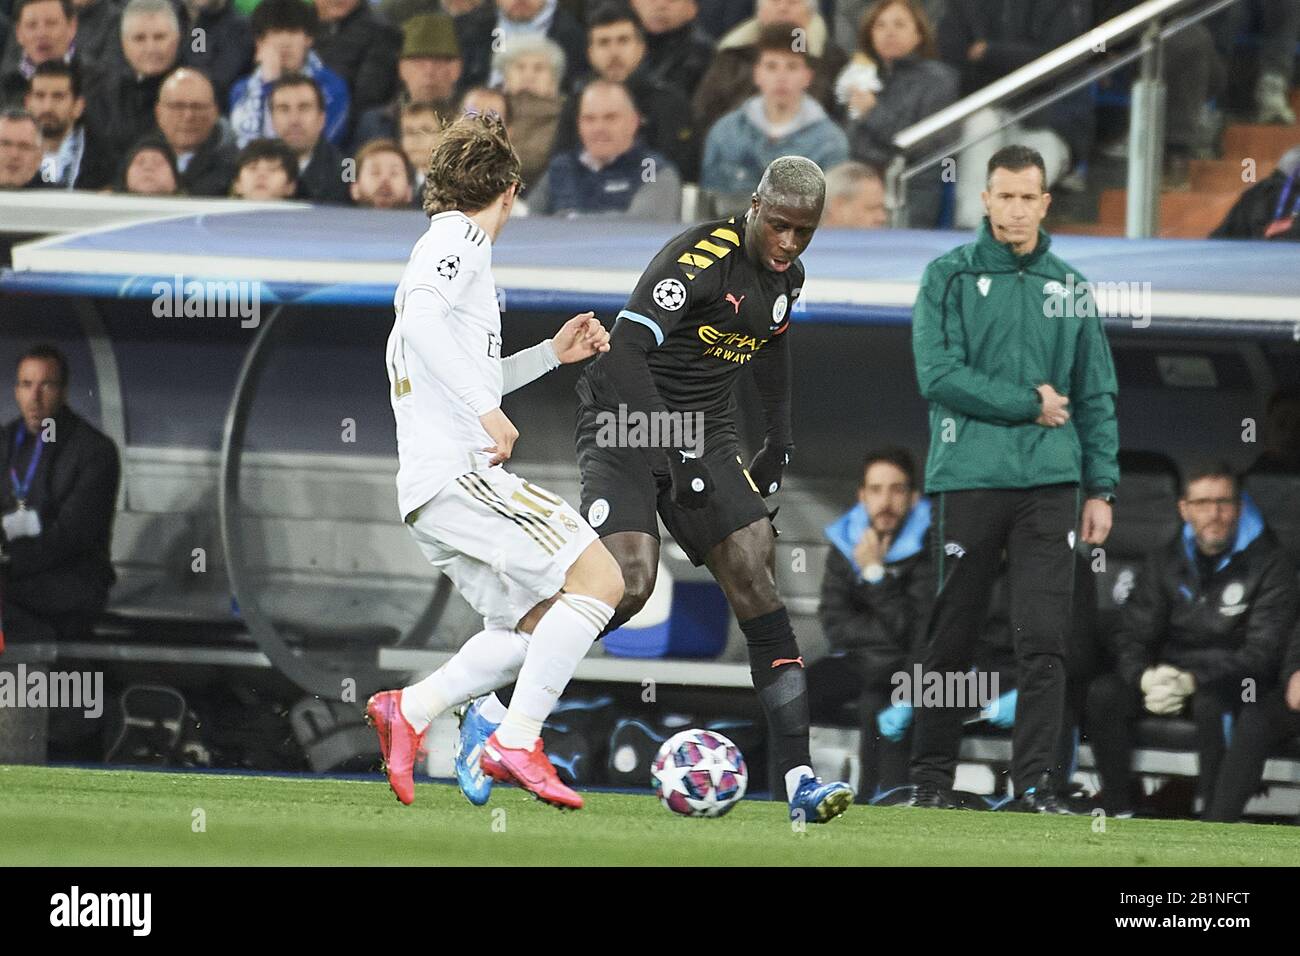 Madrid, Spain. 26th Feb, 2020. in action during the UEFA Champions League round of 16 first leg match between Real Madrid and Manchester City F.C. at Santiago Bernabeu on February 26, 2020 in Madrid, Spain Credit: Jack Abuin/ZUMA Wire/Alamy Live News Stock Photo